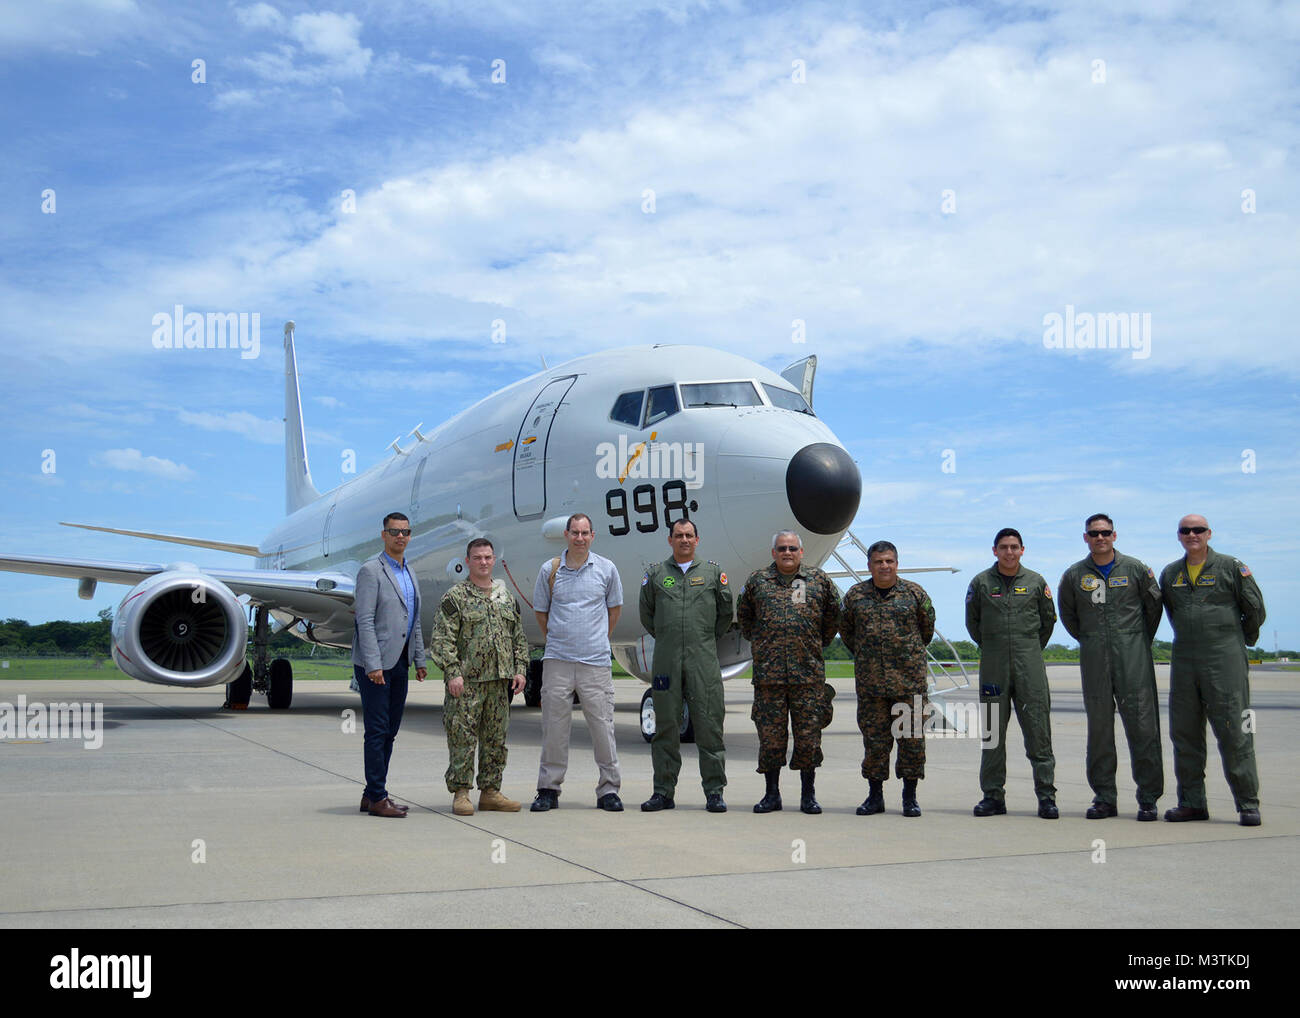 CAMALAPA, El Salvador (Jun. 23, 2016) – Distinguished visitors and U.S. Naval Officers pose for a photo after conducting familiarization flights in a P-8A Poseidon maritime surveillance aircraft. the P-8 is expected to deploy to the 4th Fleet area of responsibility in 2017. (U.S. Navy photo by Information Systems Technician 2nd Class Mallory Wasik/Released) 160623-N-PQ607-307 by U.S. Naval Forces Southern Command  U.S. 4th Fleet Stock Photo